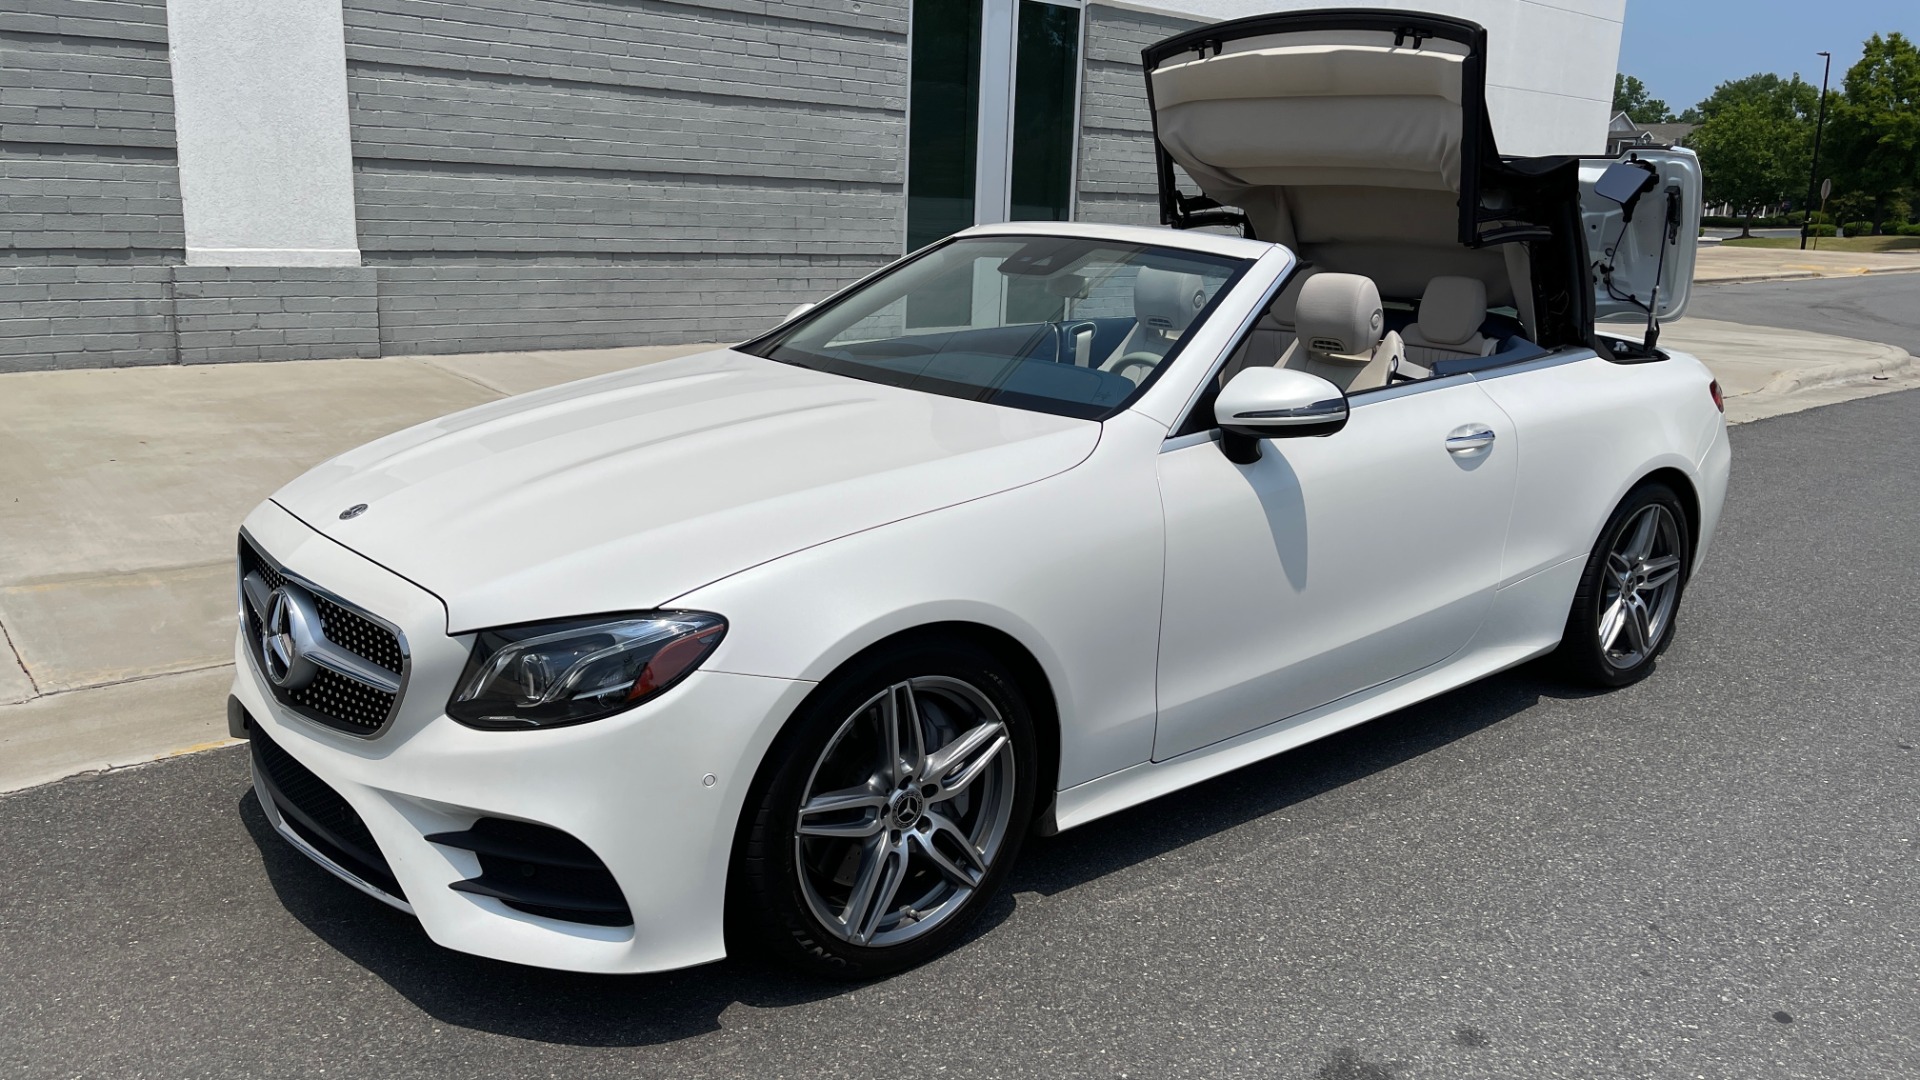 Mercedes-Benz E 400 4Matic Cabriolet Amg Line Wallpapers